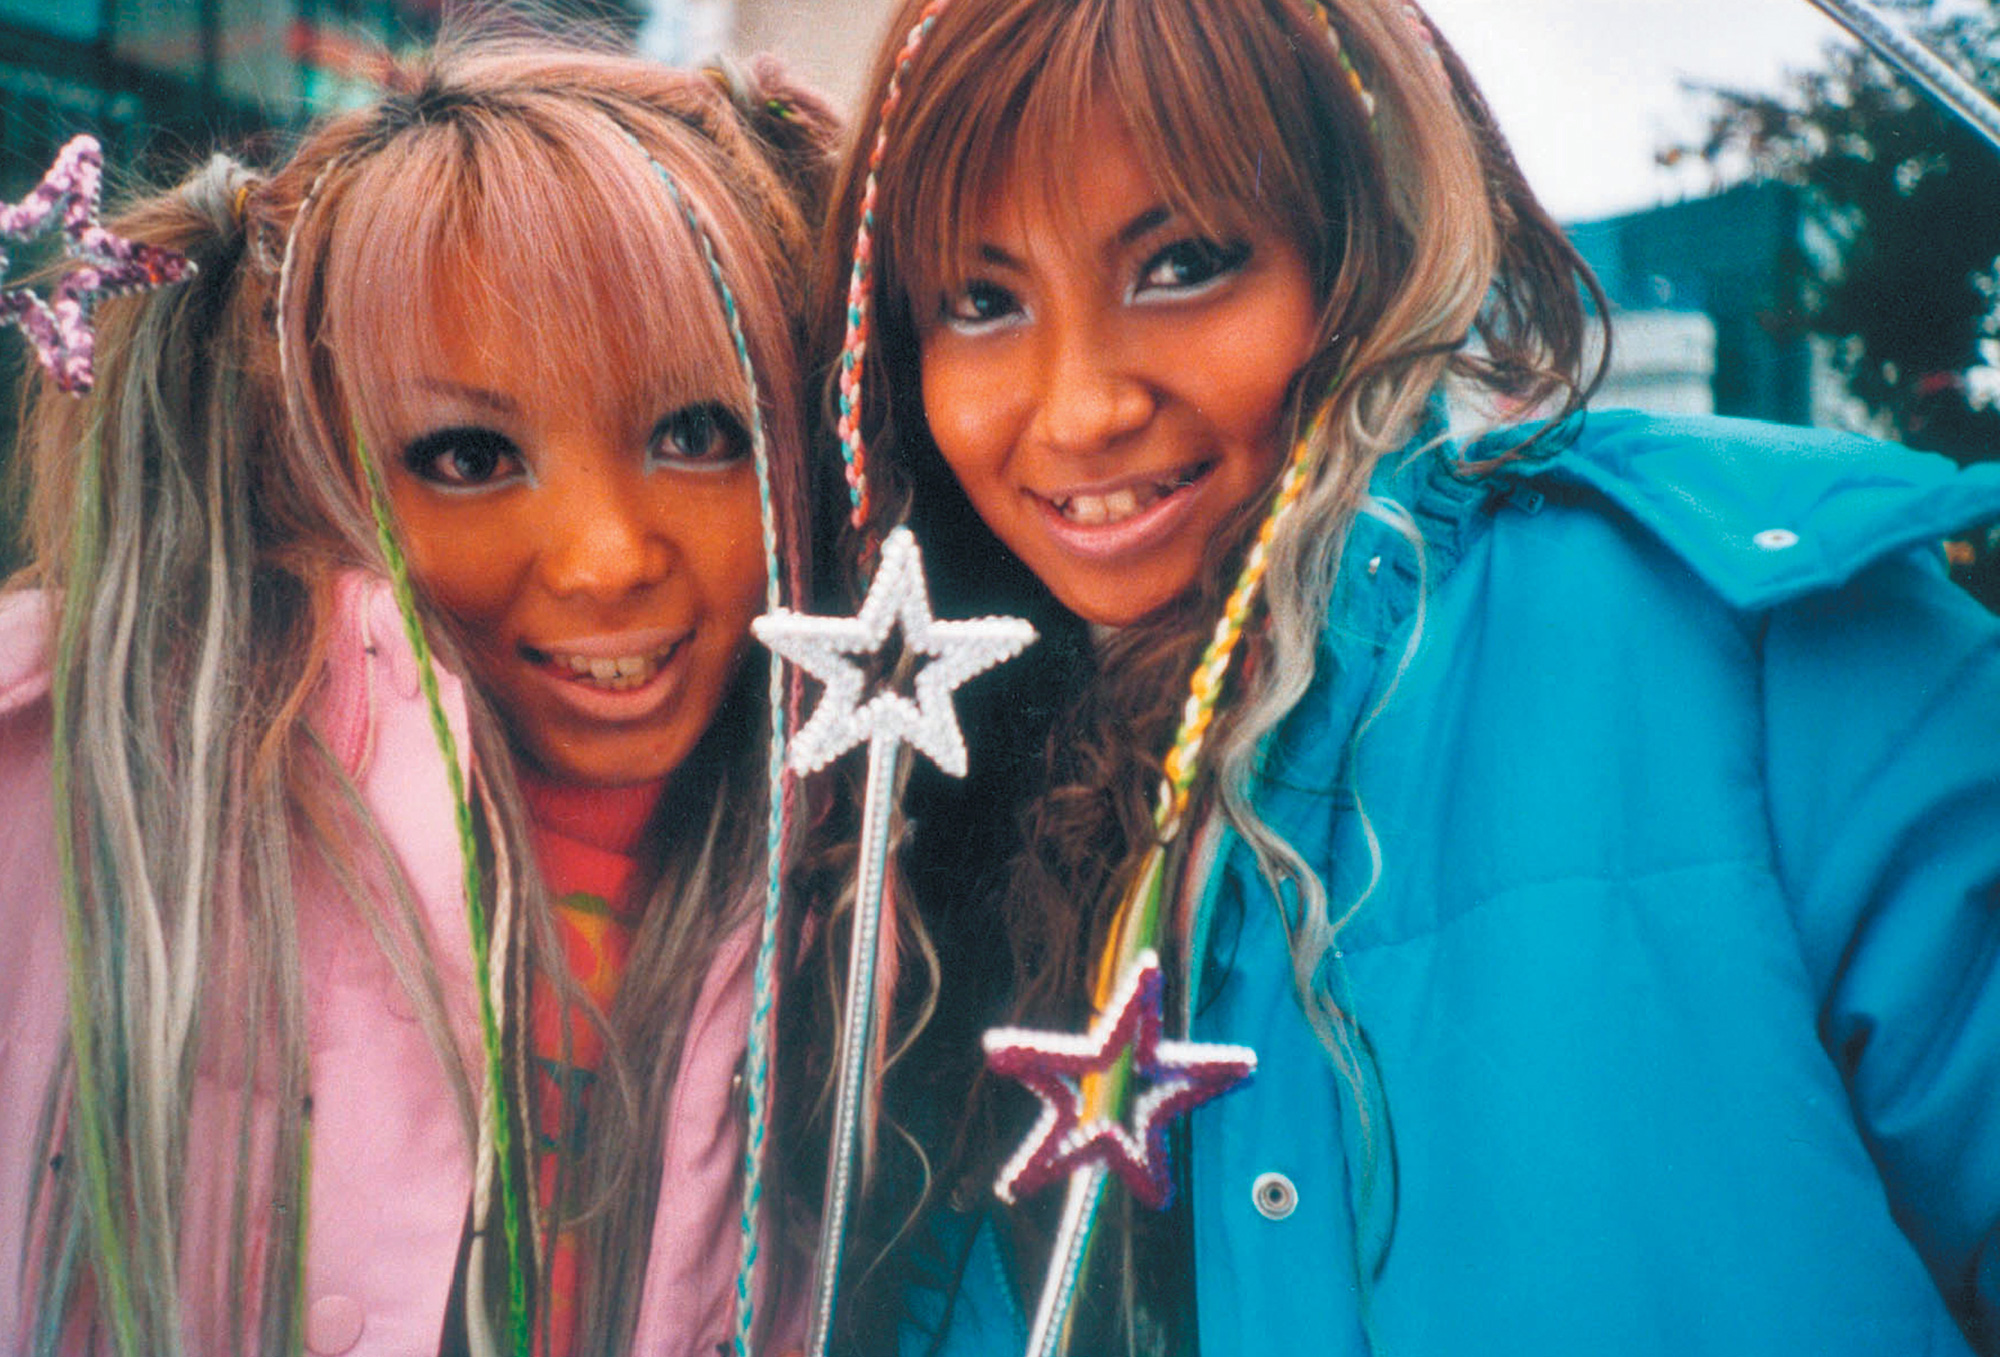 A Lomographic image depicting two girls wearing colorful makeup.